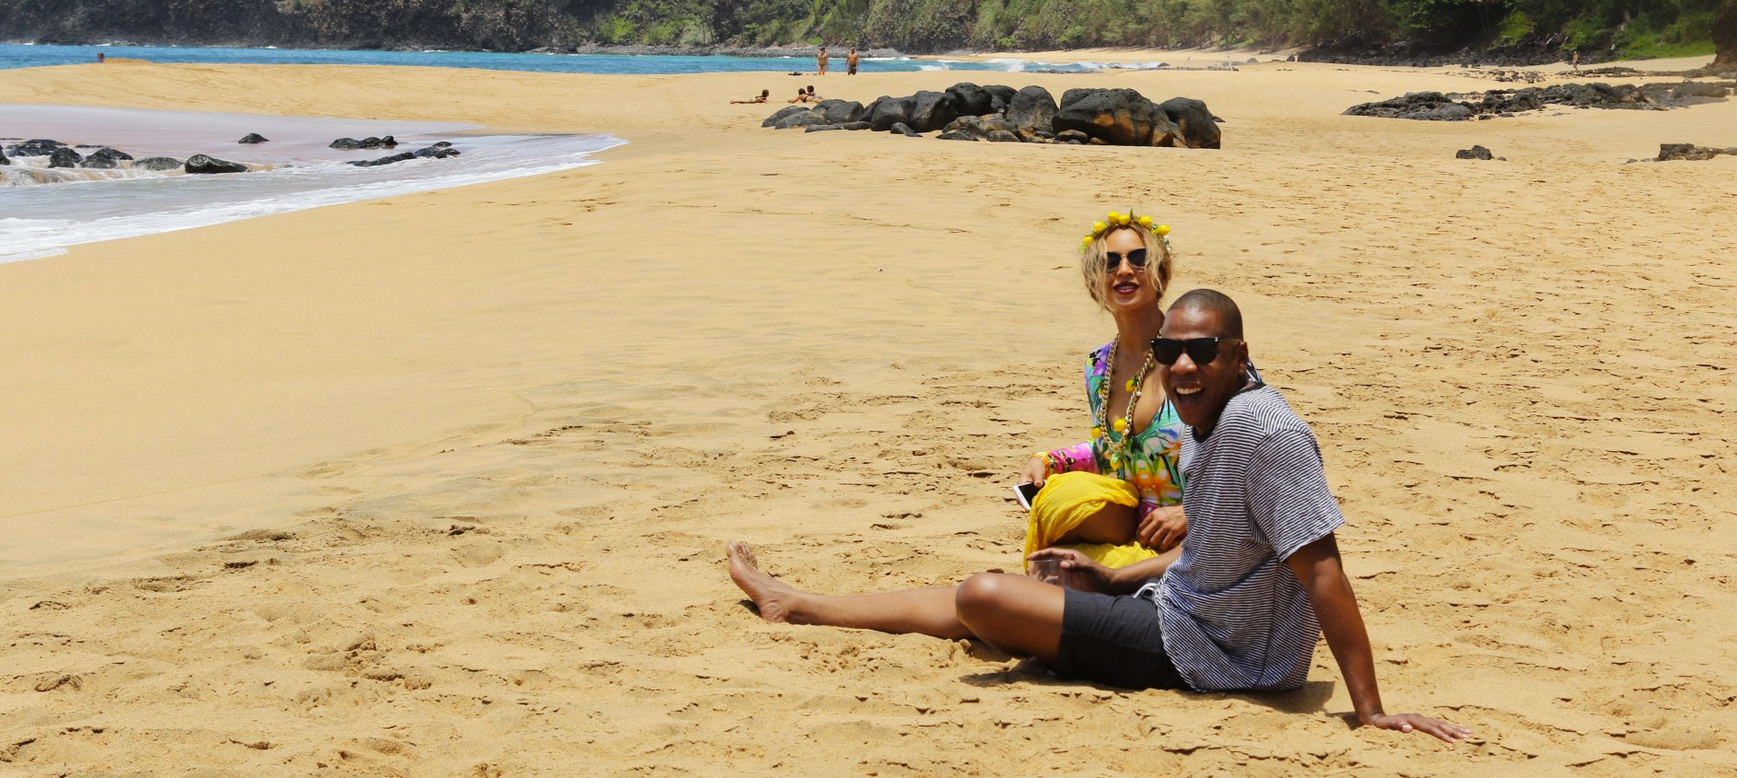 18 Times Beyoncé and Jay Z Basked in Love and Lemonade on Their Hawaiian Vacation
